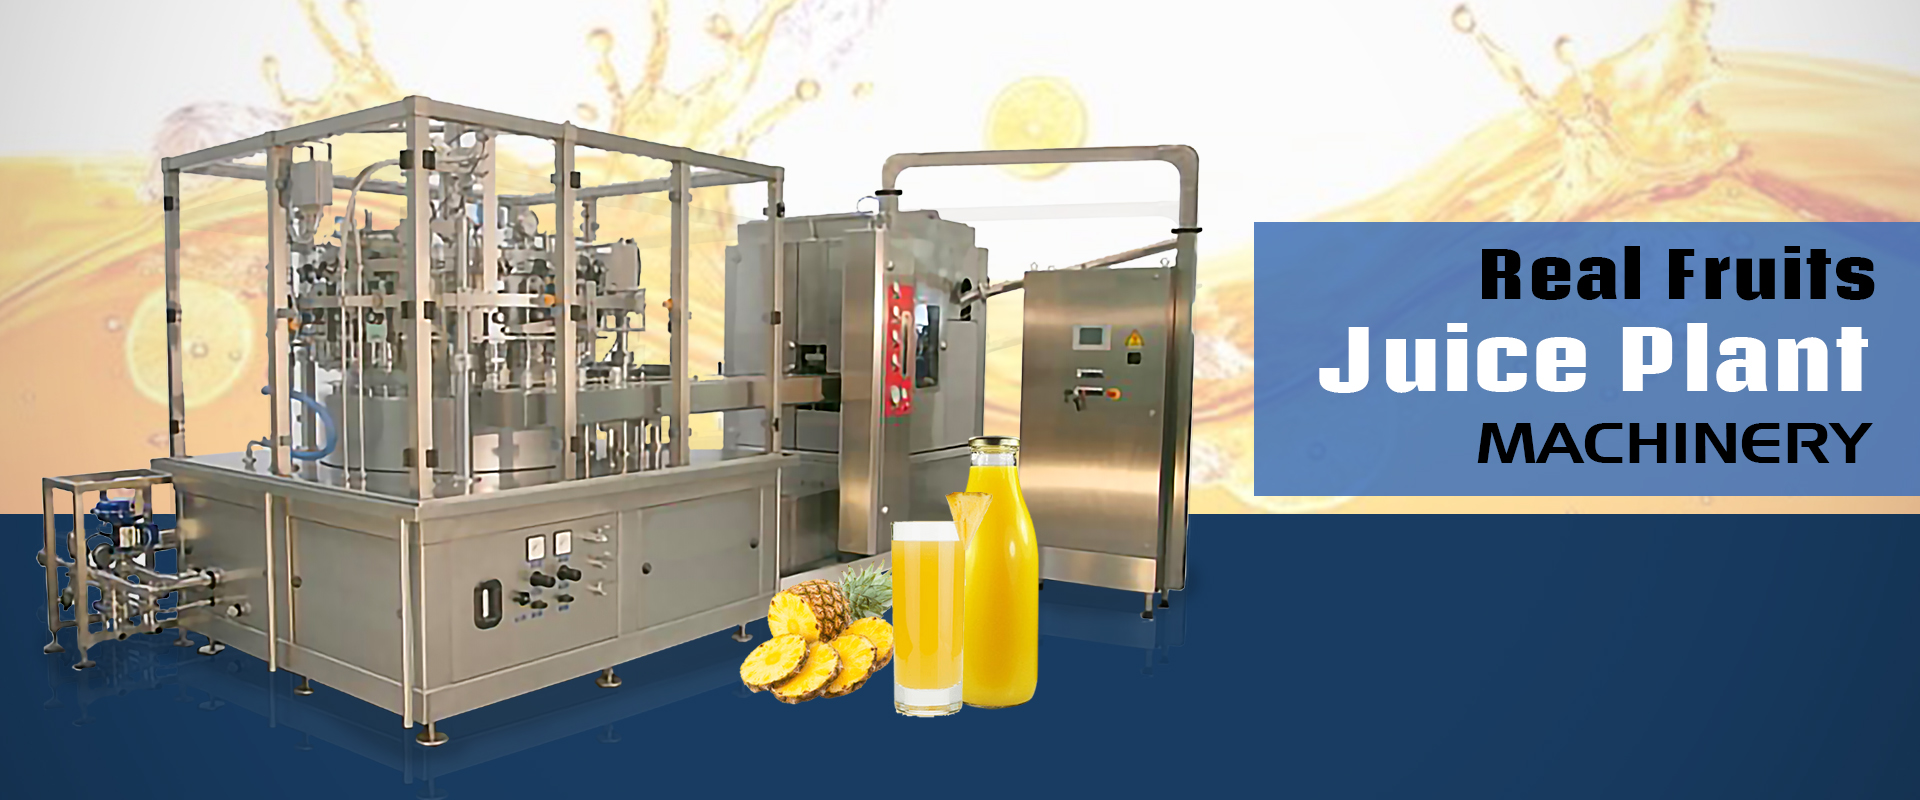 Real Fruits Juice Plant Machinery